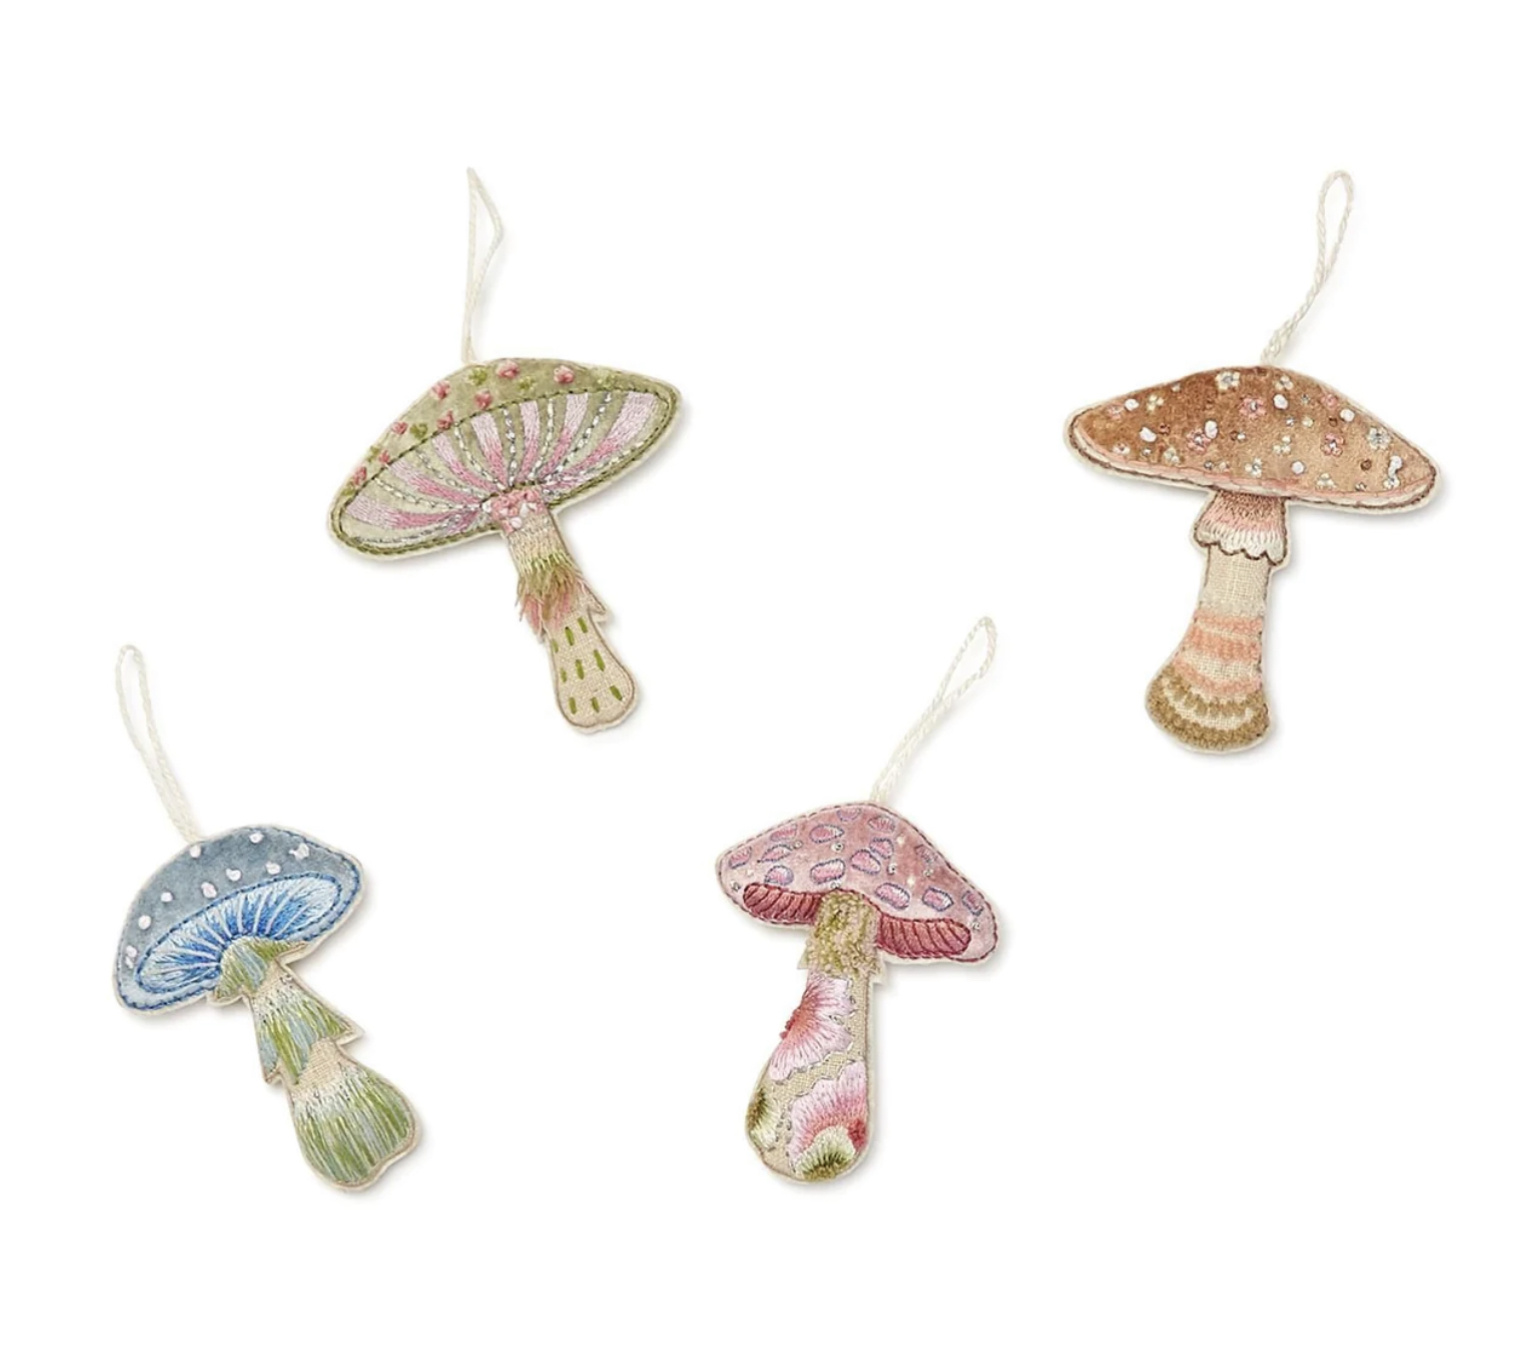 Two's Company Embroidered Mushroom Ornament